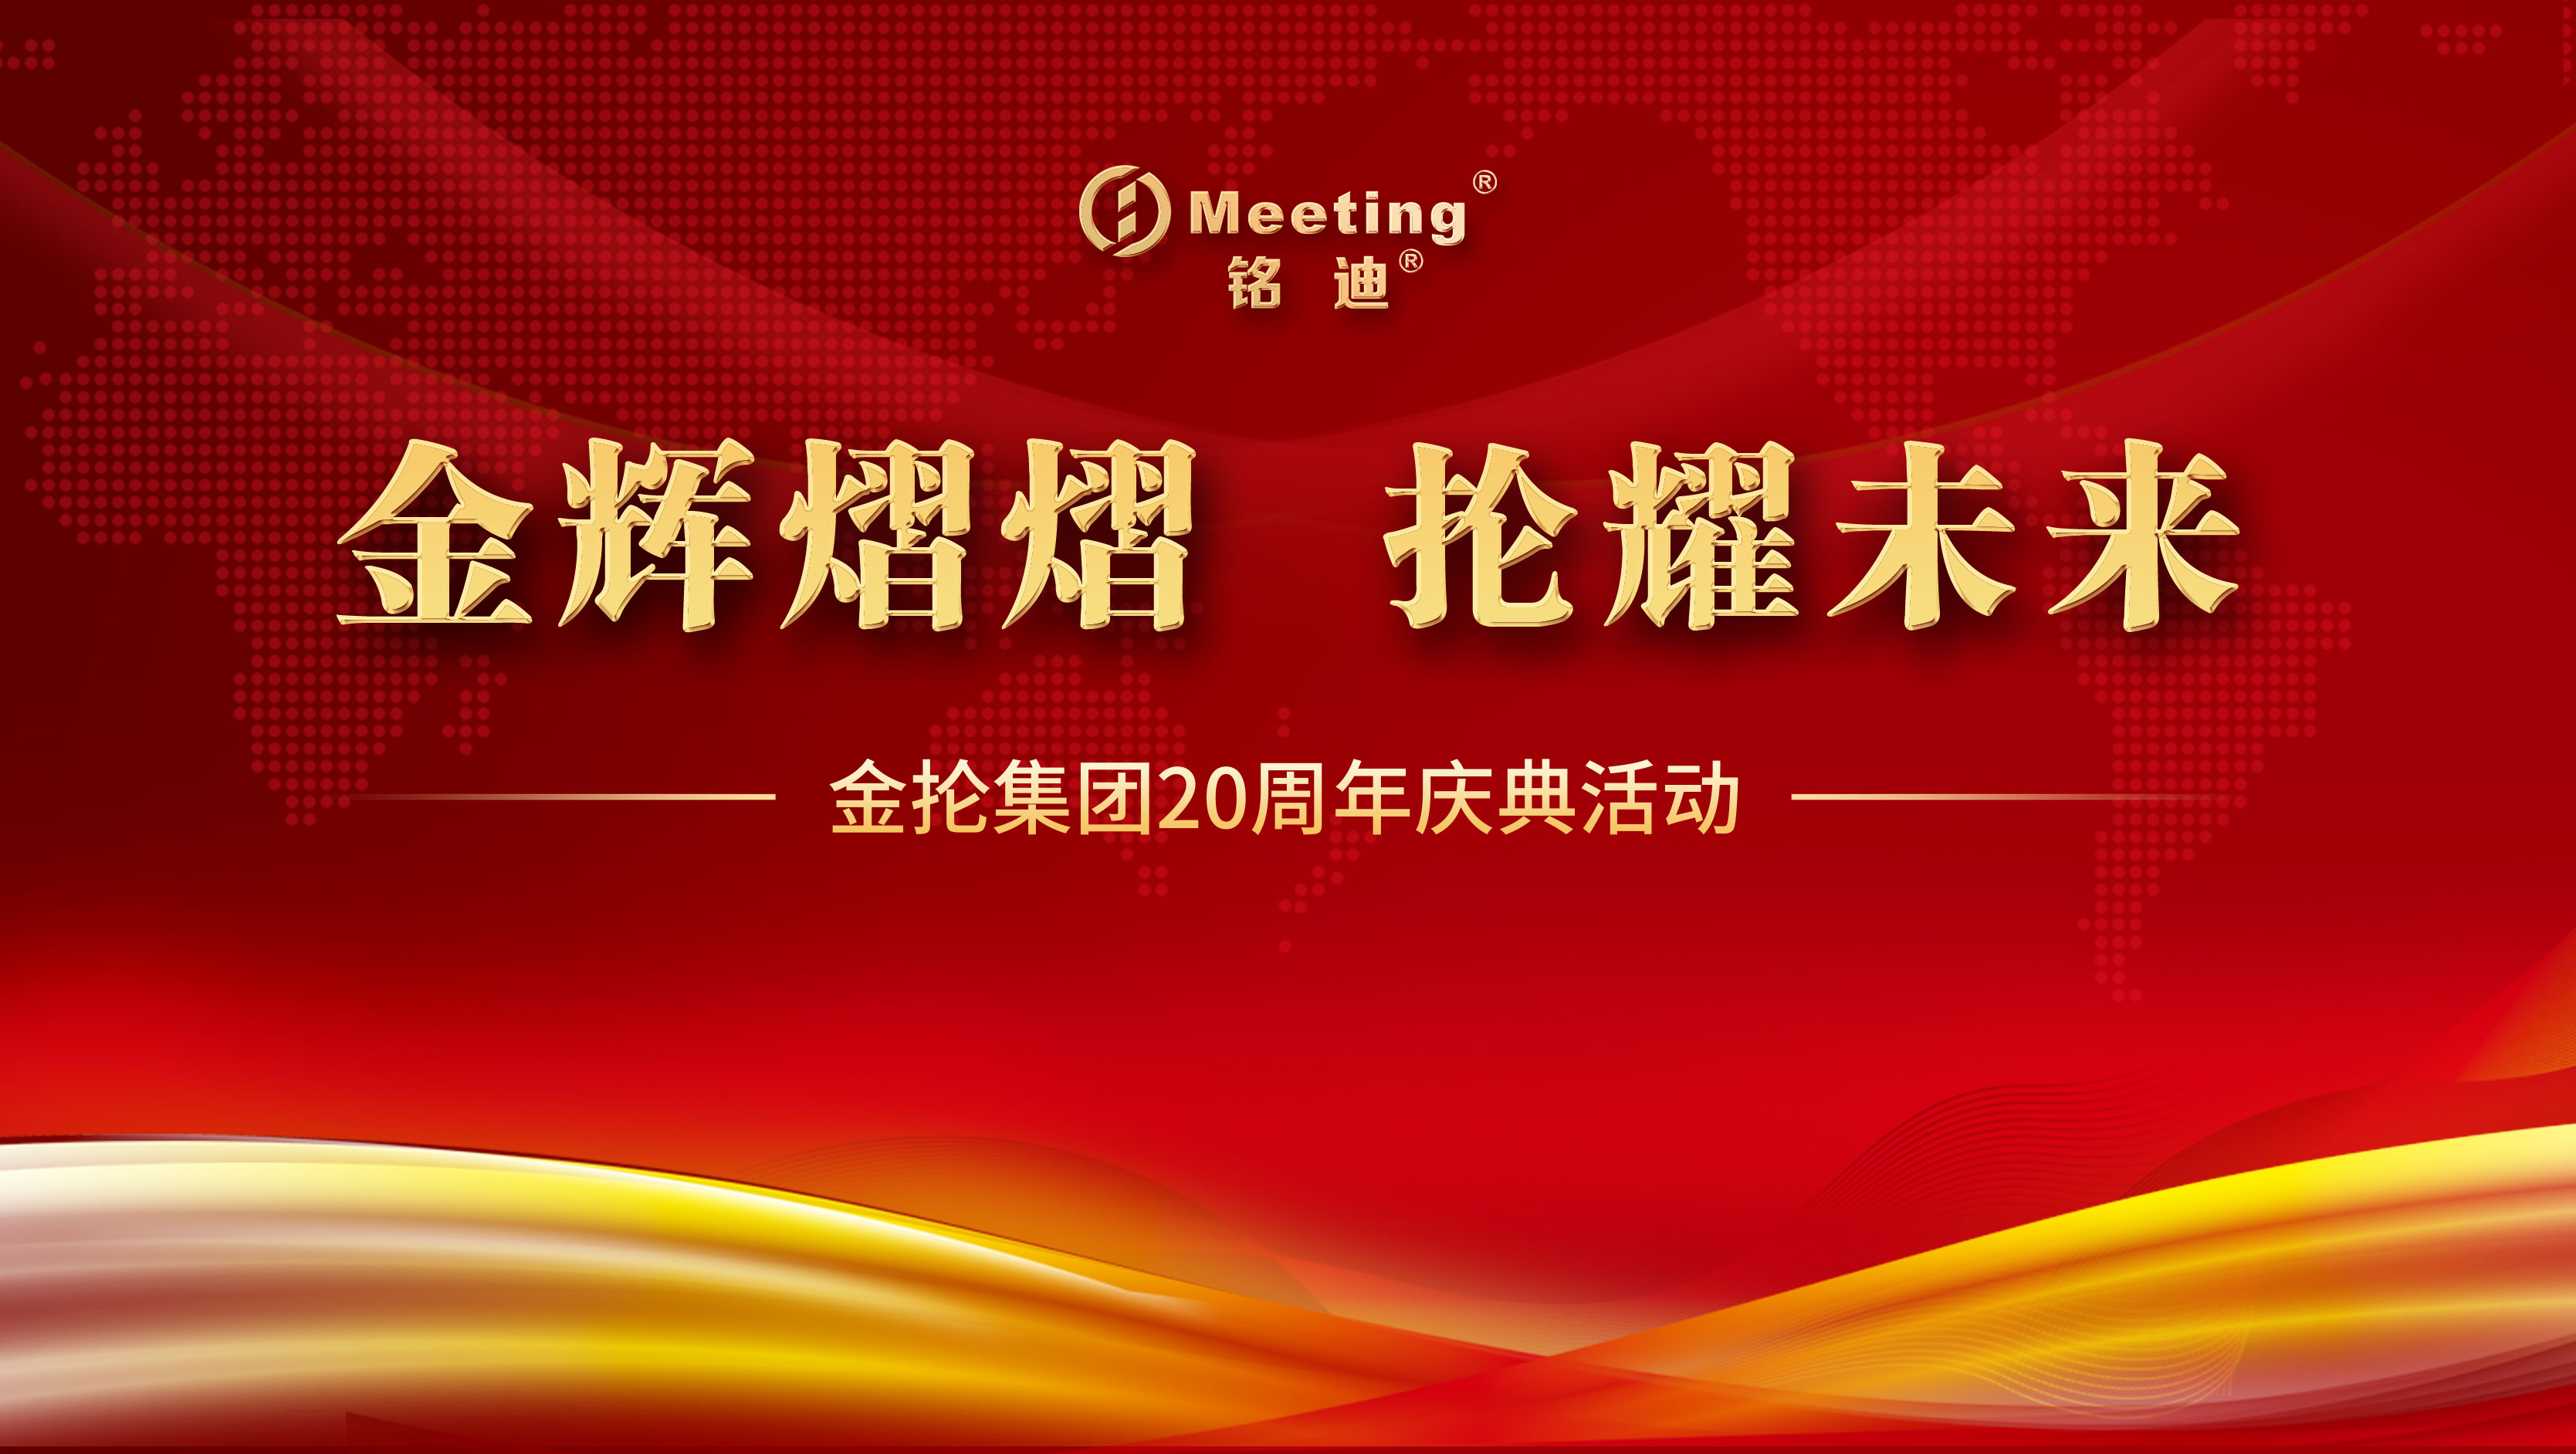 Warm congratulations on the 20th anniversary of the establishment of Jinlun Group